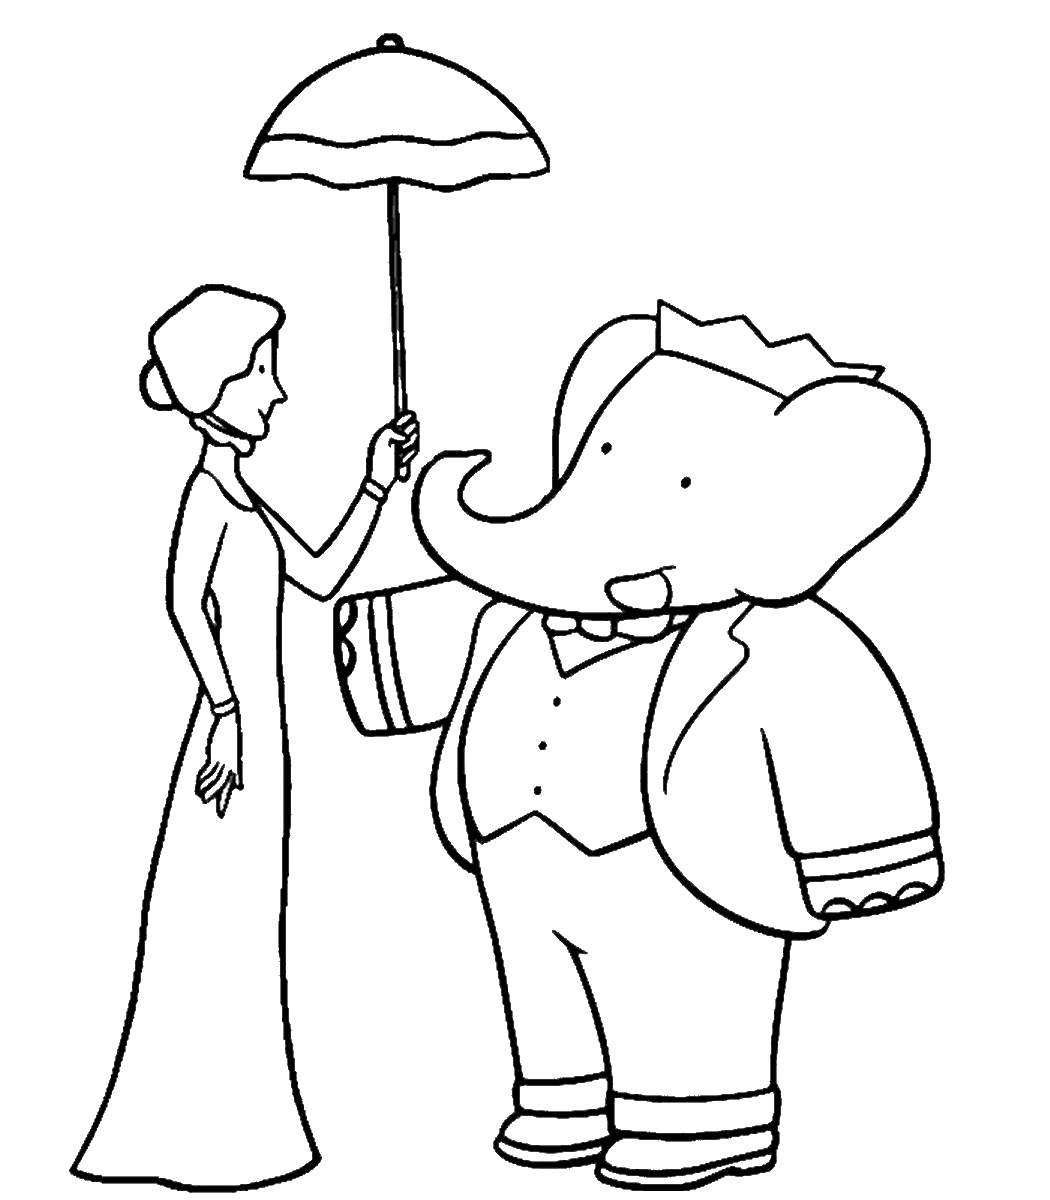 Babar Coloring Pages TV Film babar_cl_01 Printable 2020 00359 Coloring4free